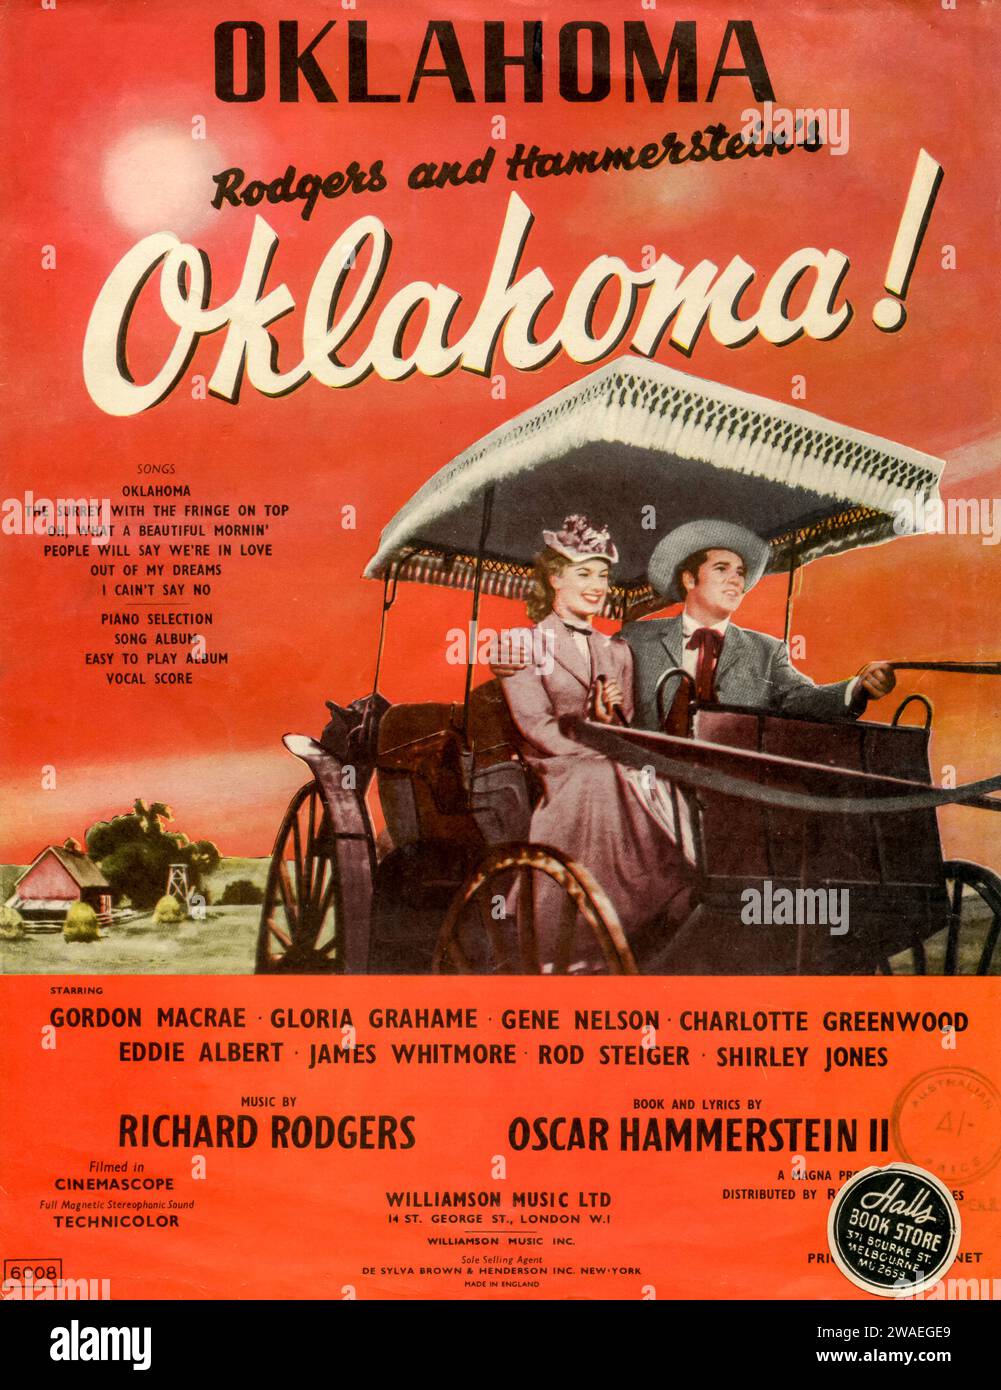 An Australian publication sold by Halls Bookstore in Melbourne, of the Broadway and Hollywood musical, Oklahoma! The musical was written by Richard Rogers and Oscar Hammerstein II based on the 1931 play, Green Grow the Lilacs by Lynn Riggs. It was first performed in 1943 on Broadway to great success and later made into a motion picture film Stock Photo